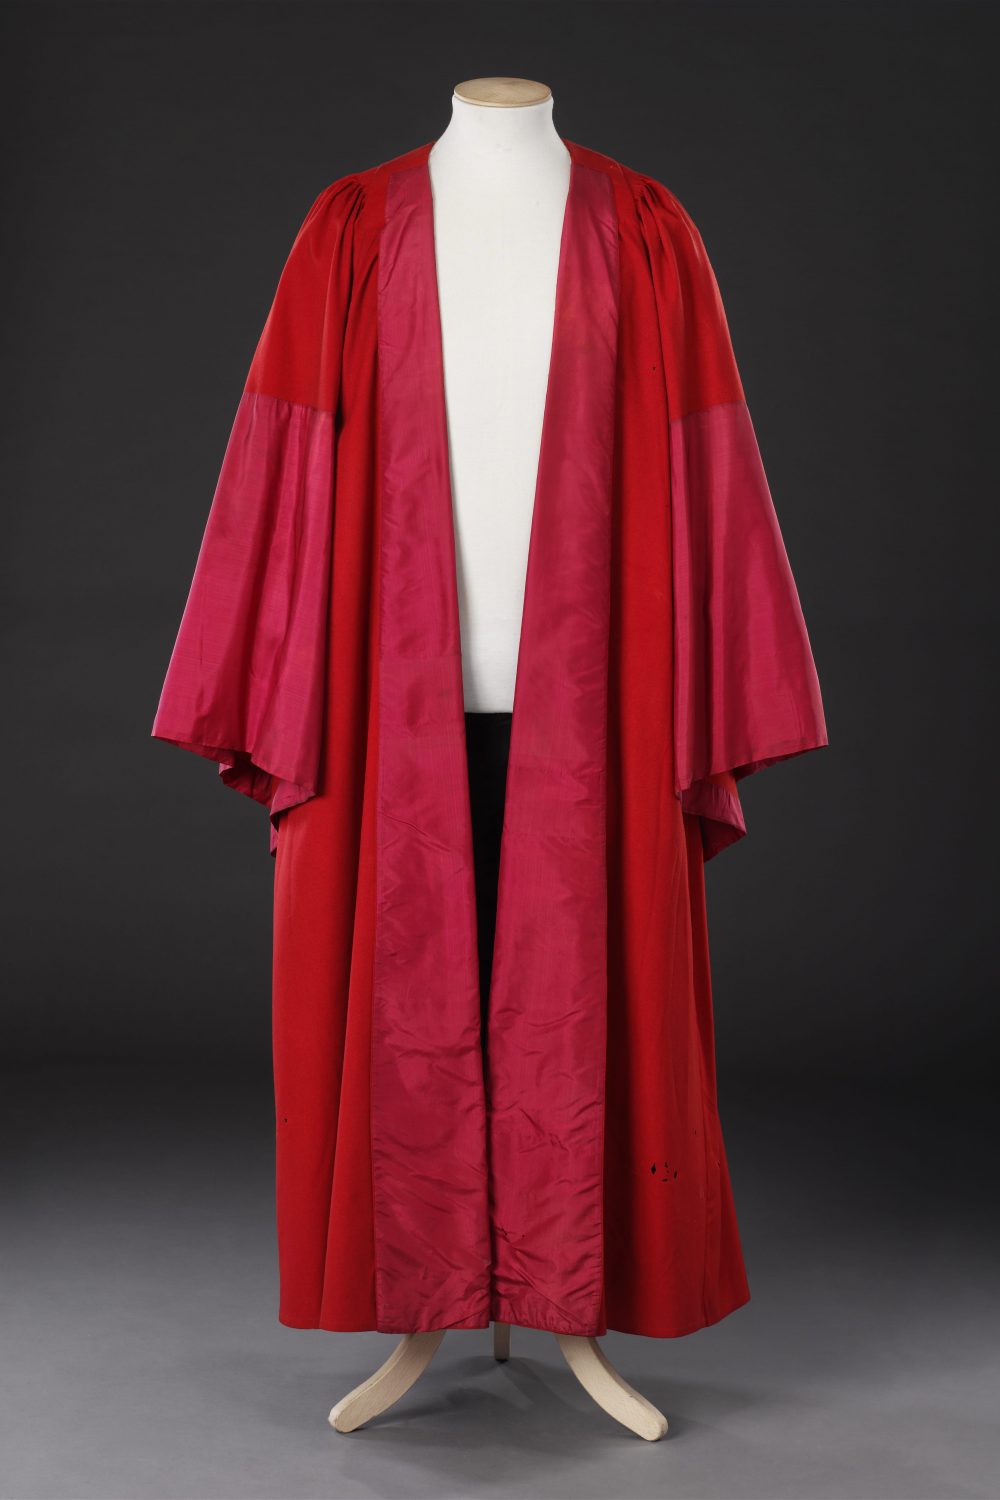 Academic Gown